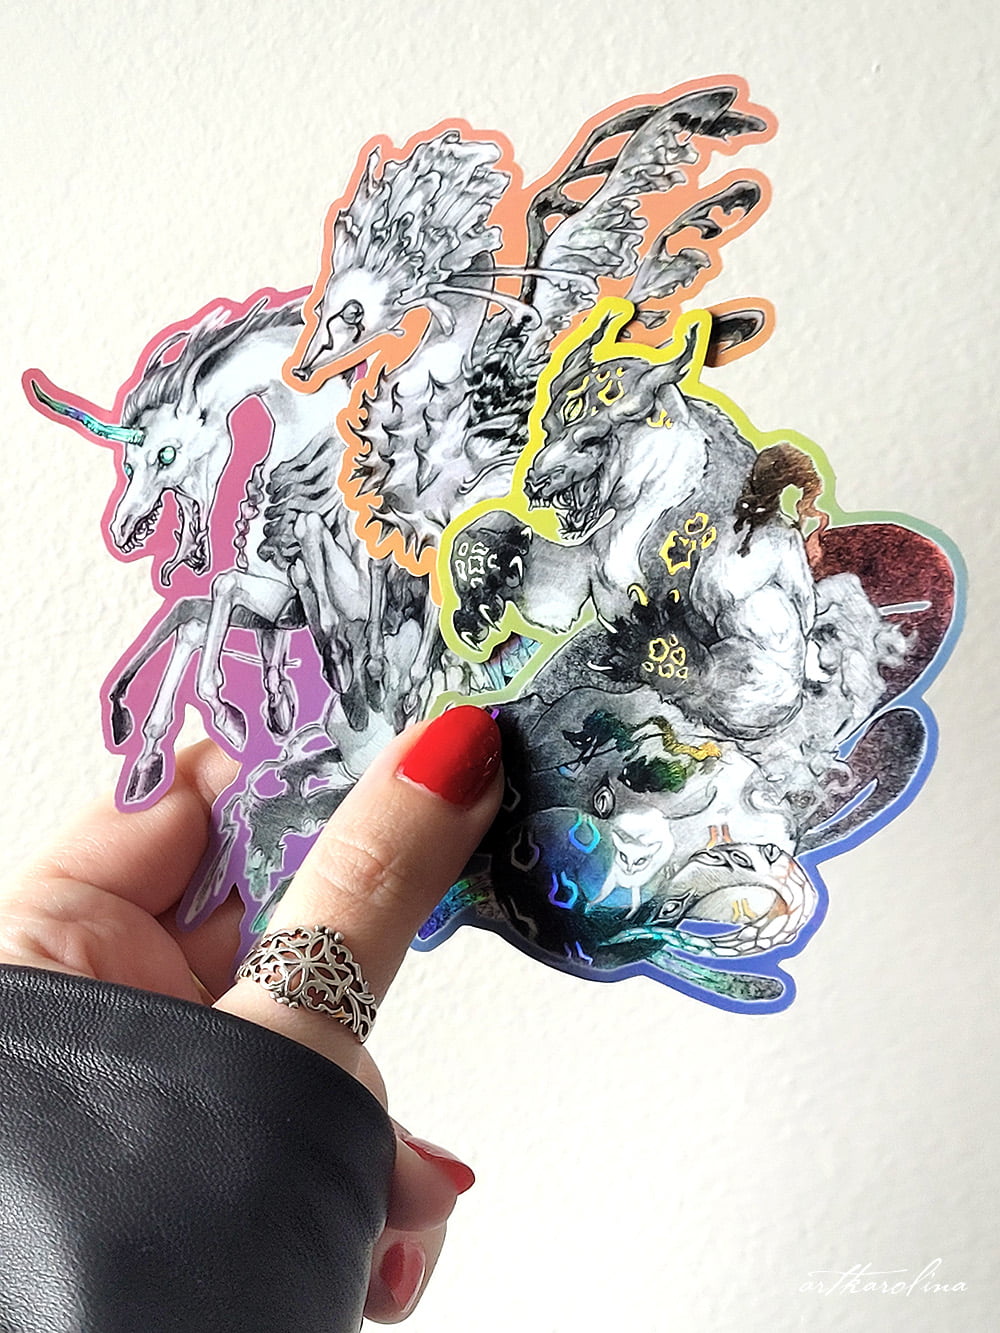 Holographic Stickers of Demons and Monsters